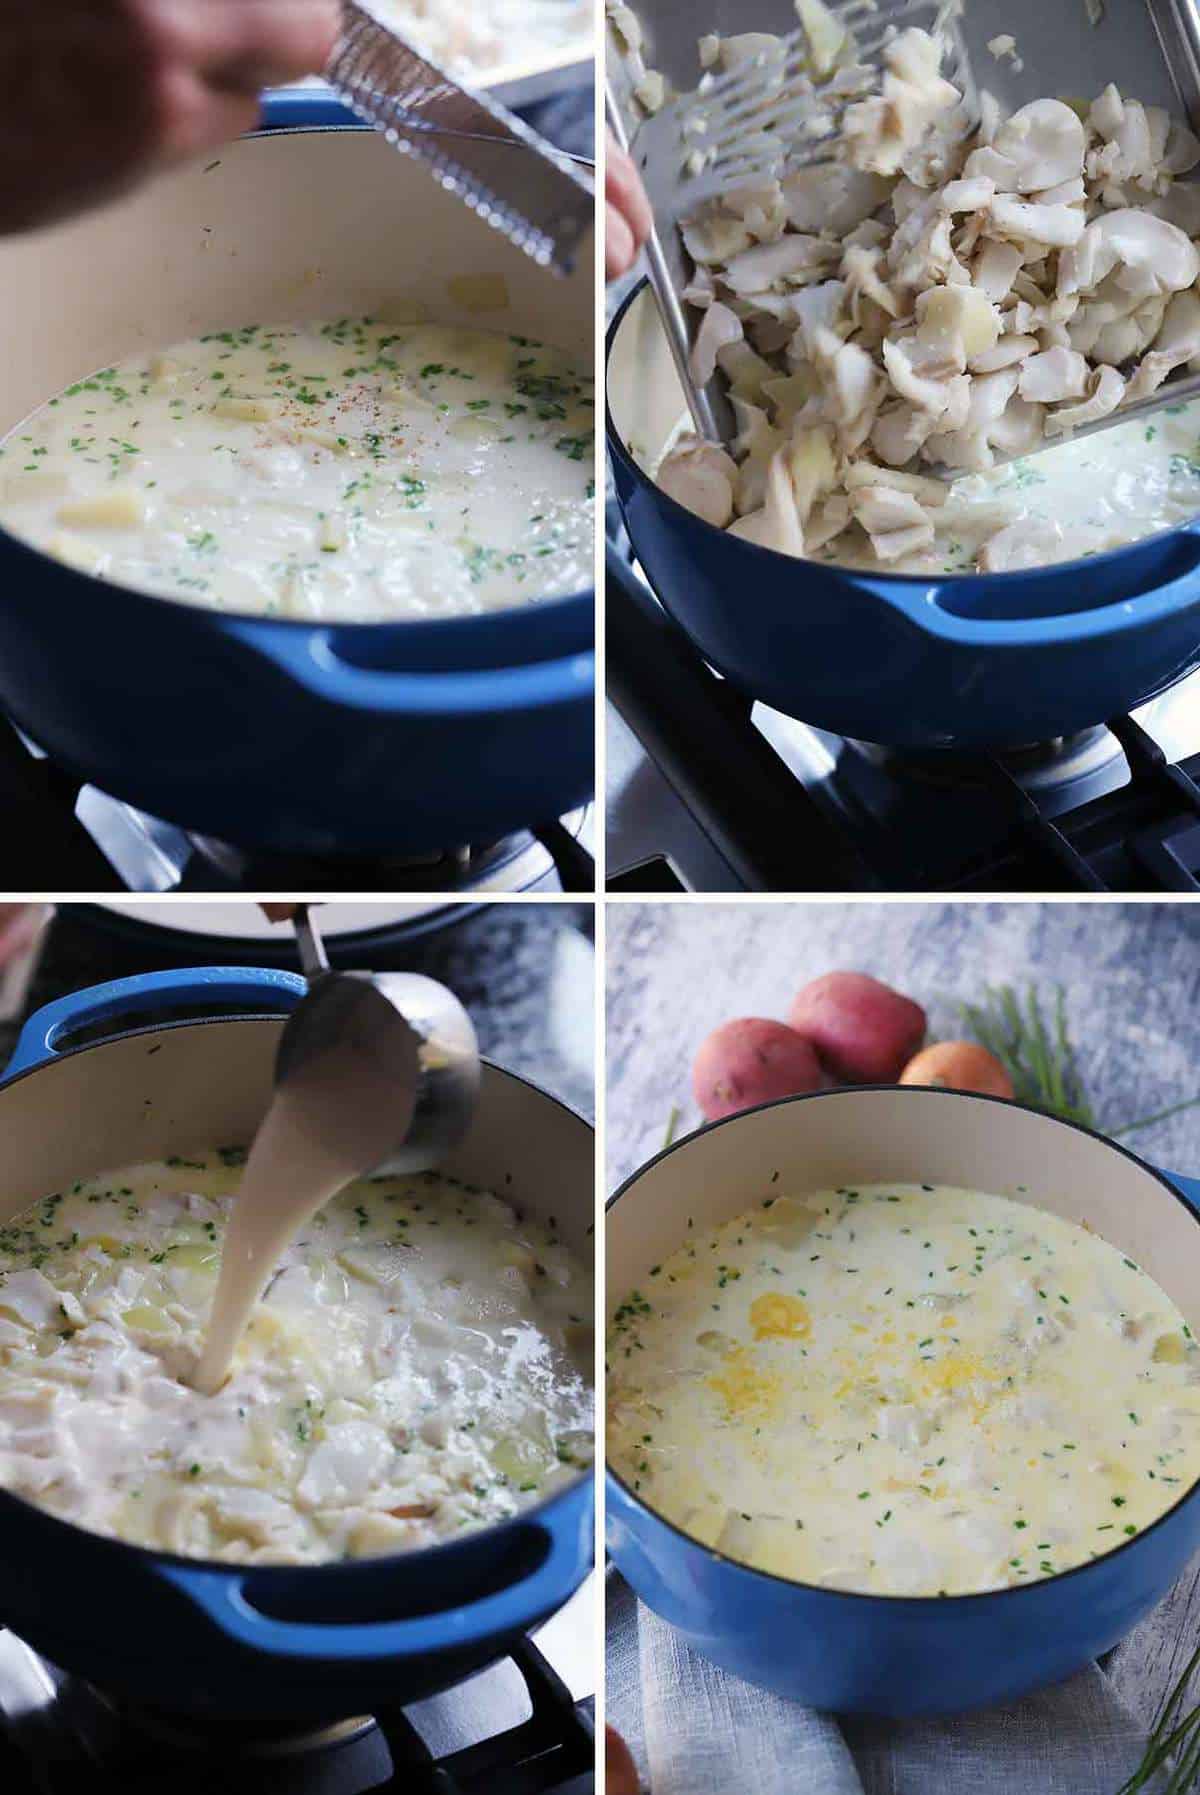 Process collage showing adding flaked poached cod and heavy cream to fish chowder.